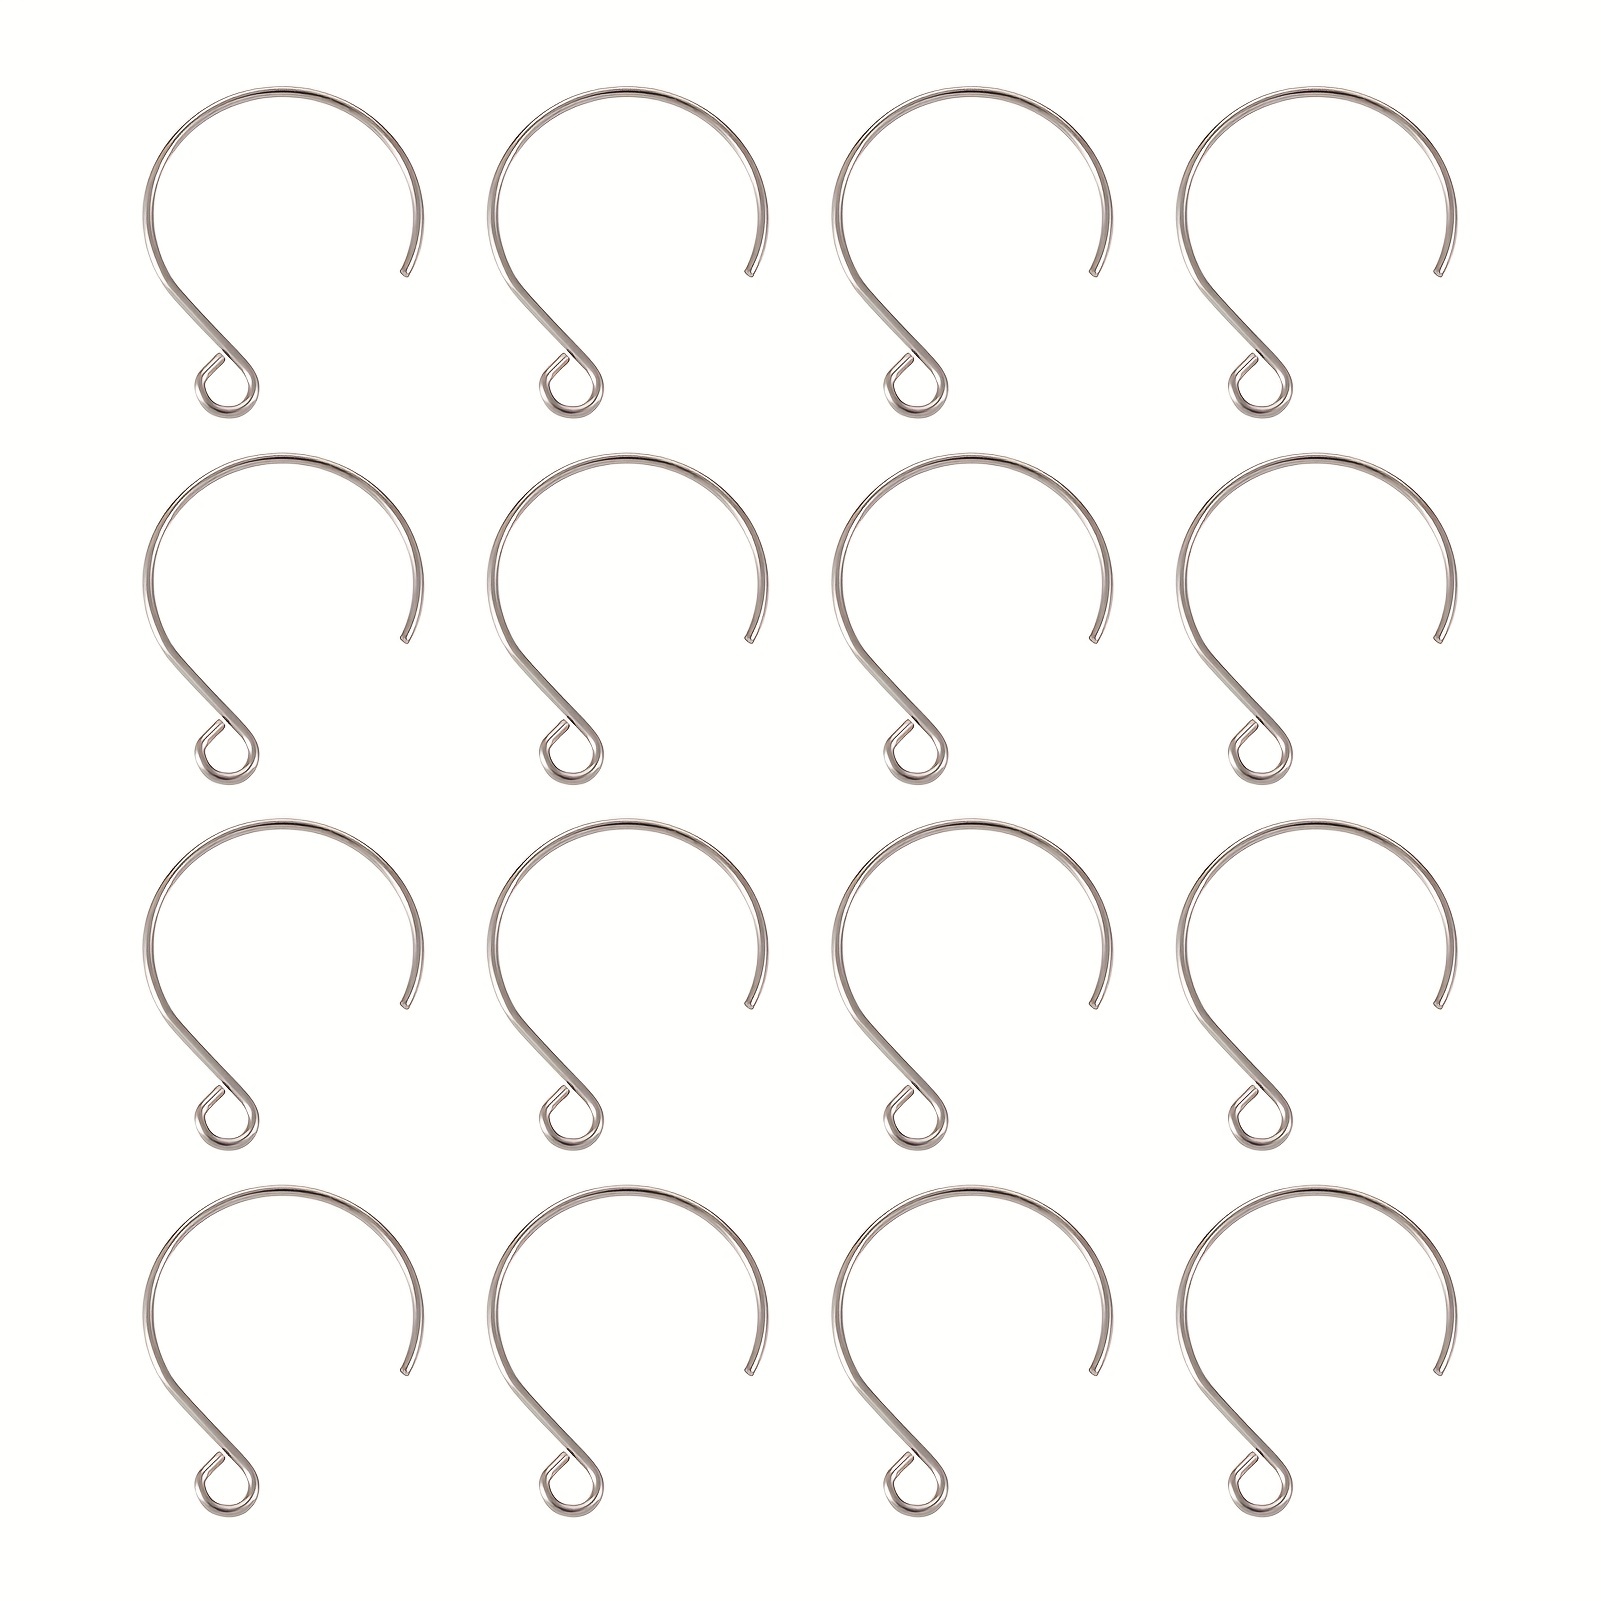 Ear Wires, Hooks for Earring Making, French Ear Wires